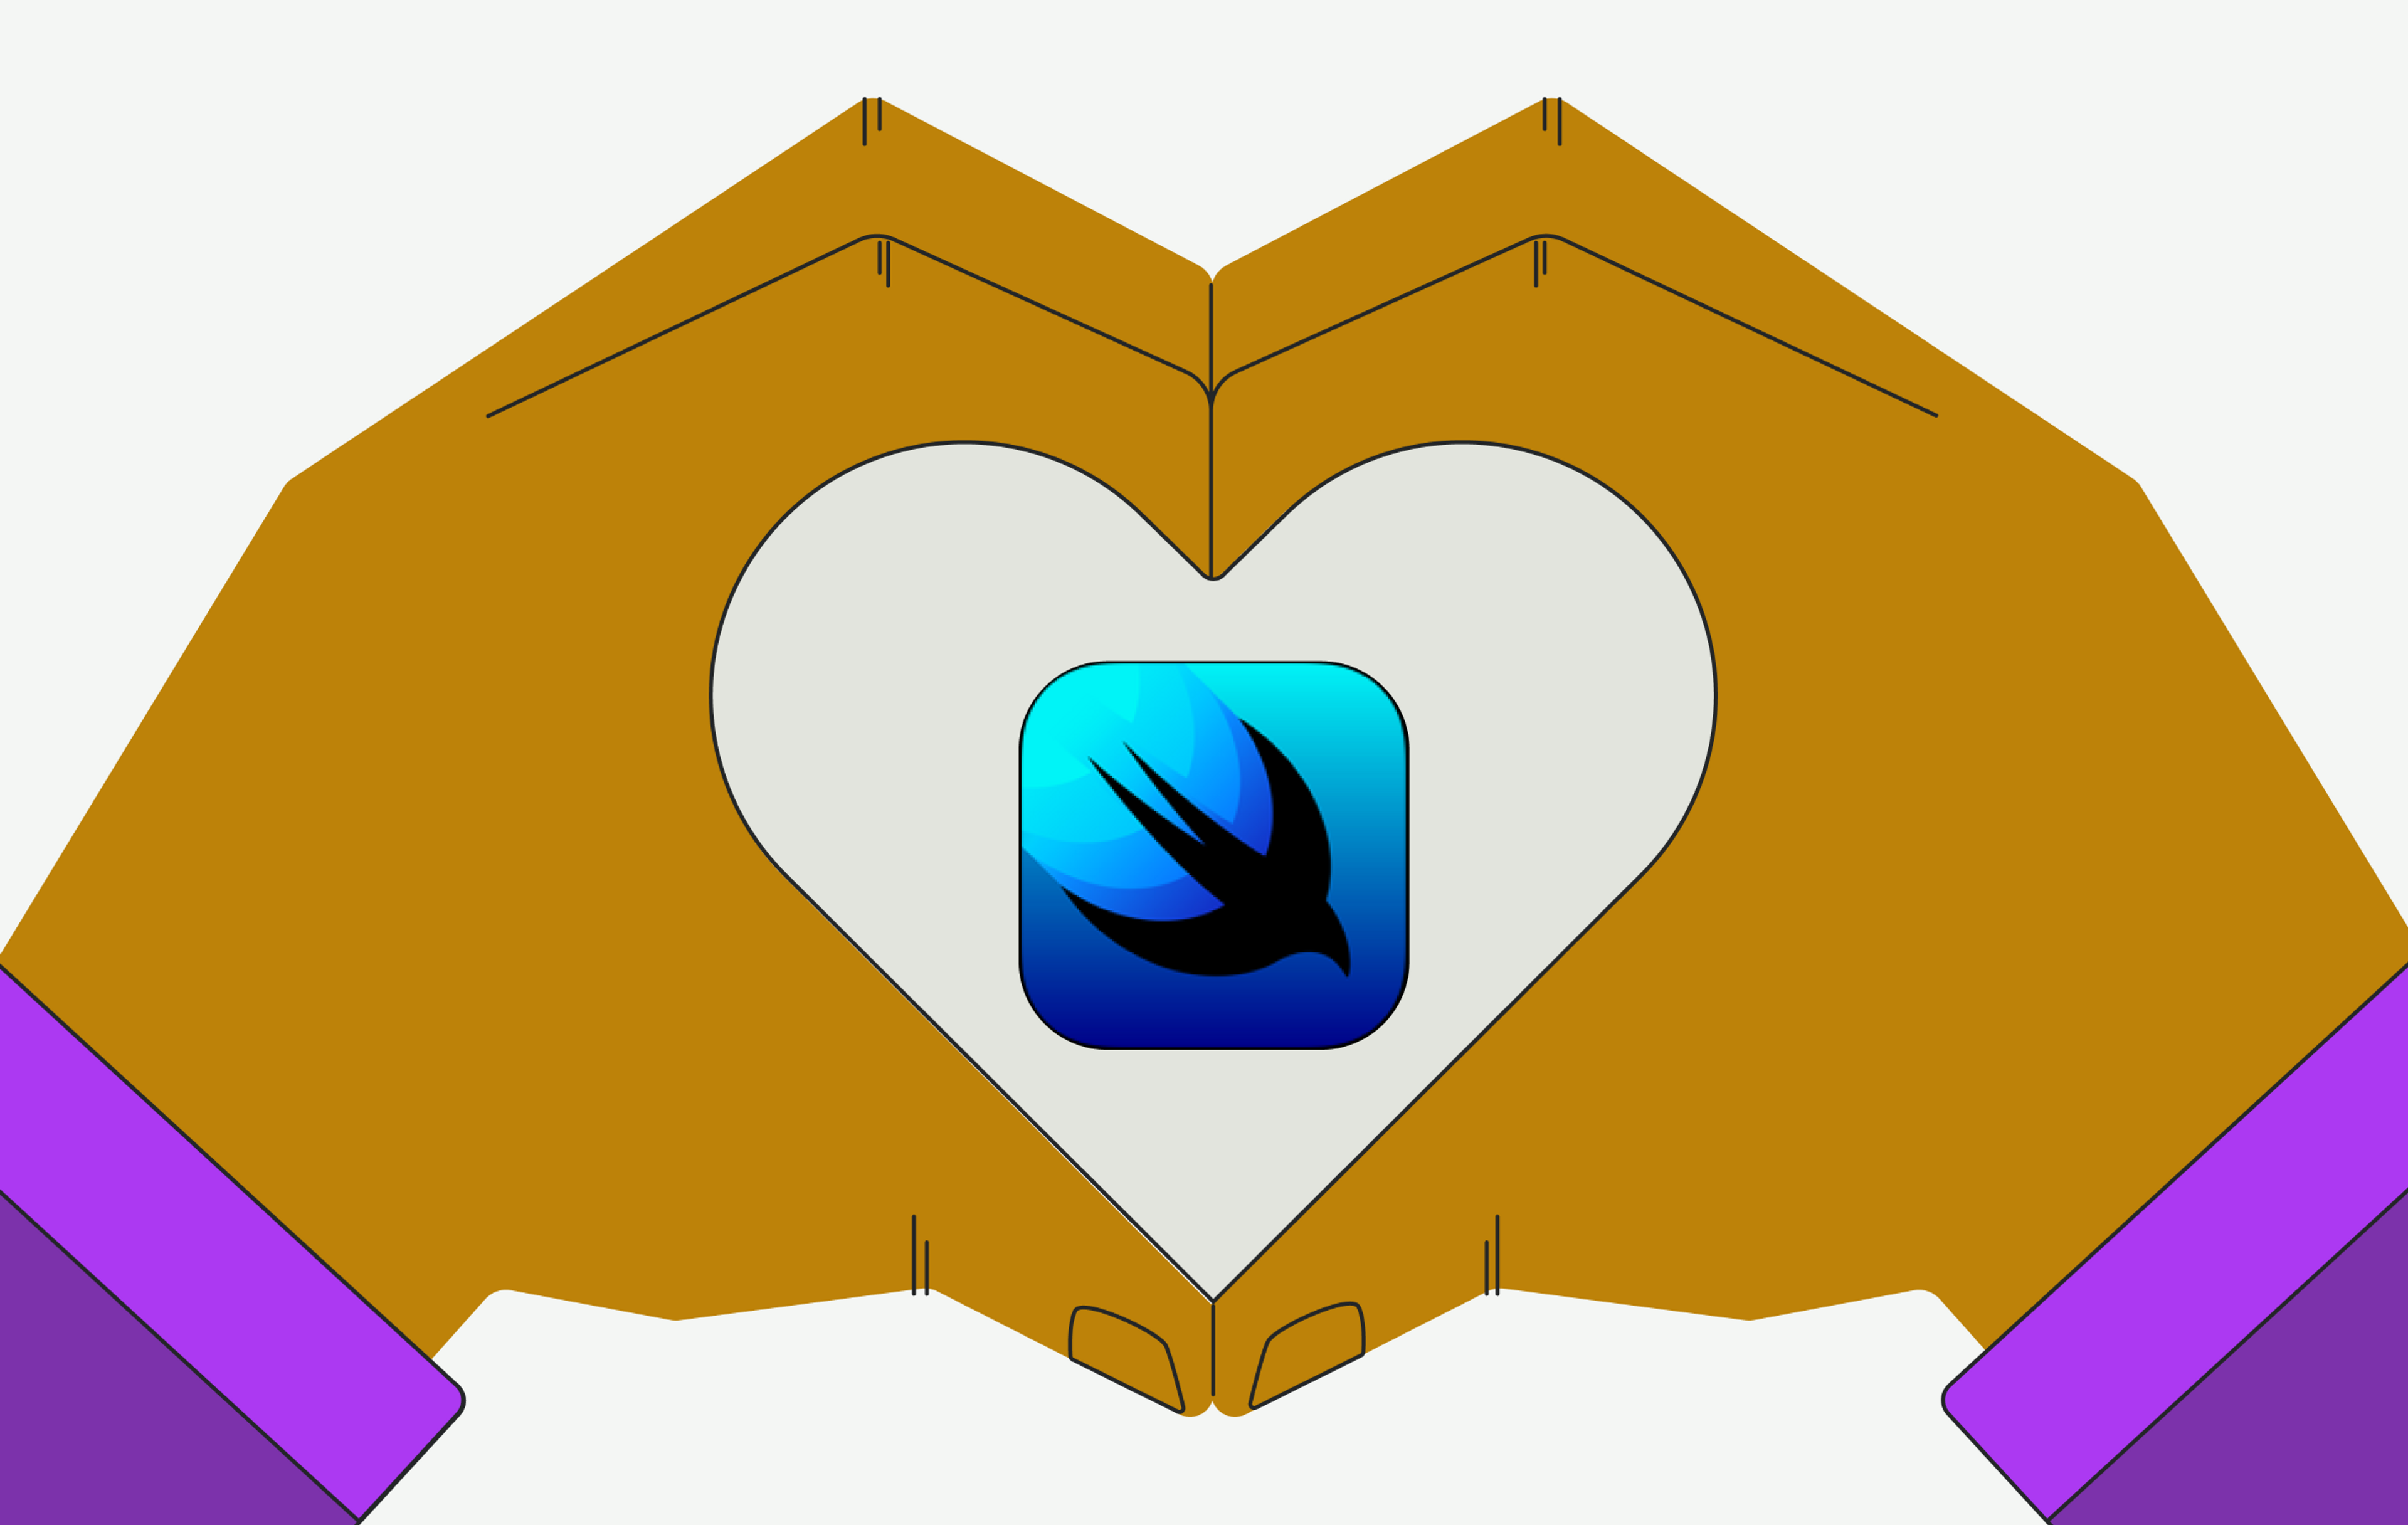 An illustration of a pair of hands making a heart shape, the focal point within the hands is the SwiftUI logo